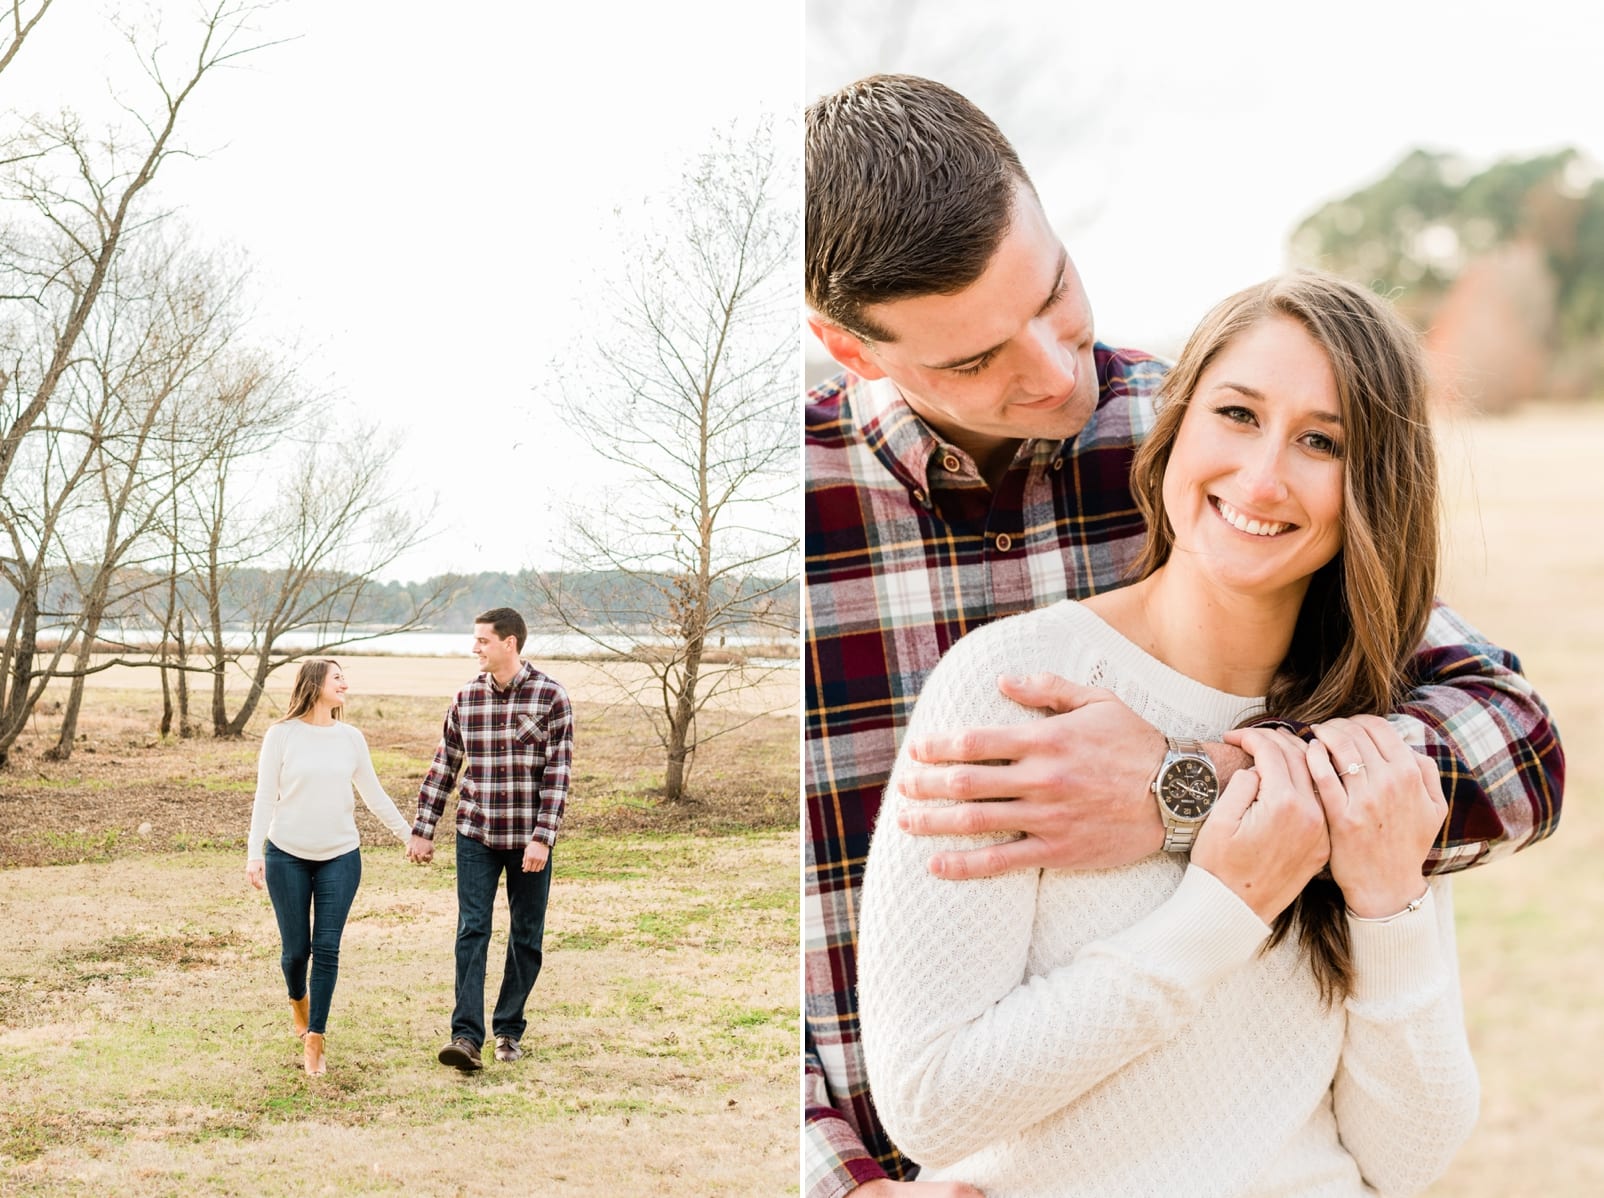 Raleigh couple walking through a field and then snuggled together photo